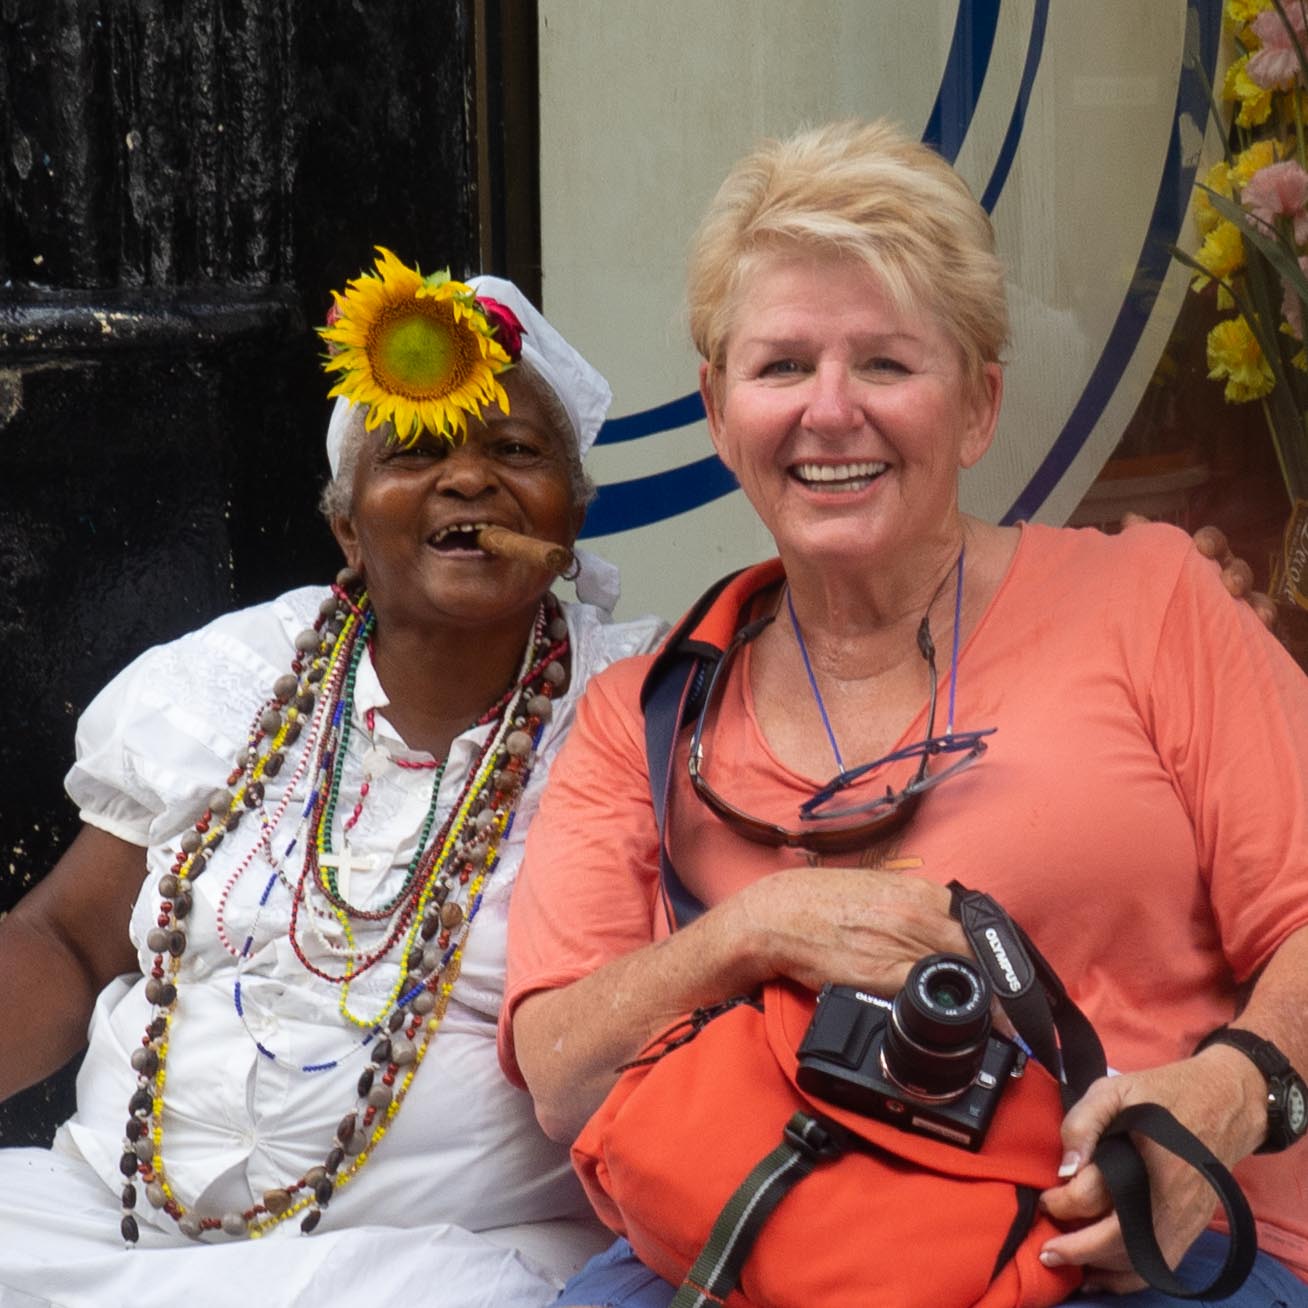 In Old Havana Cuba with a cigar lady.  You pay for your picture.